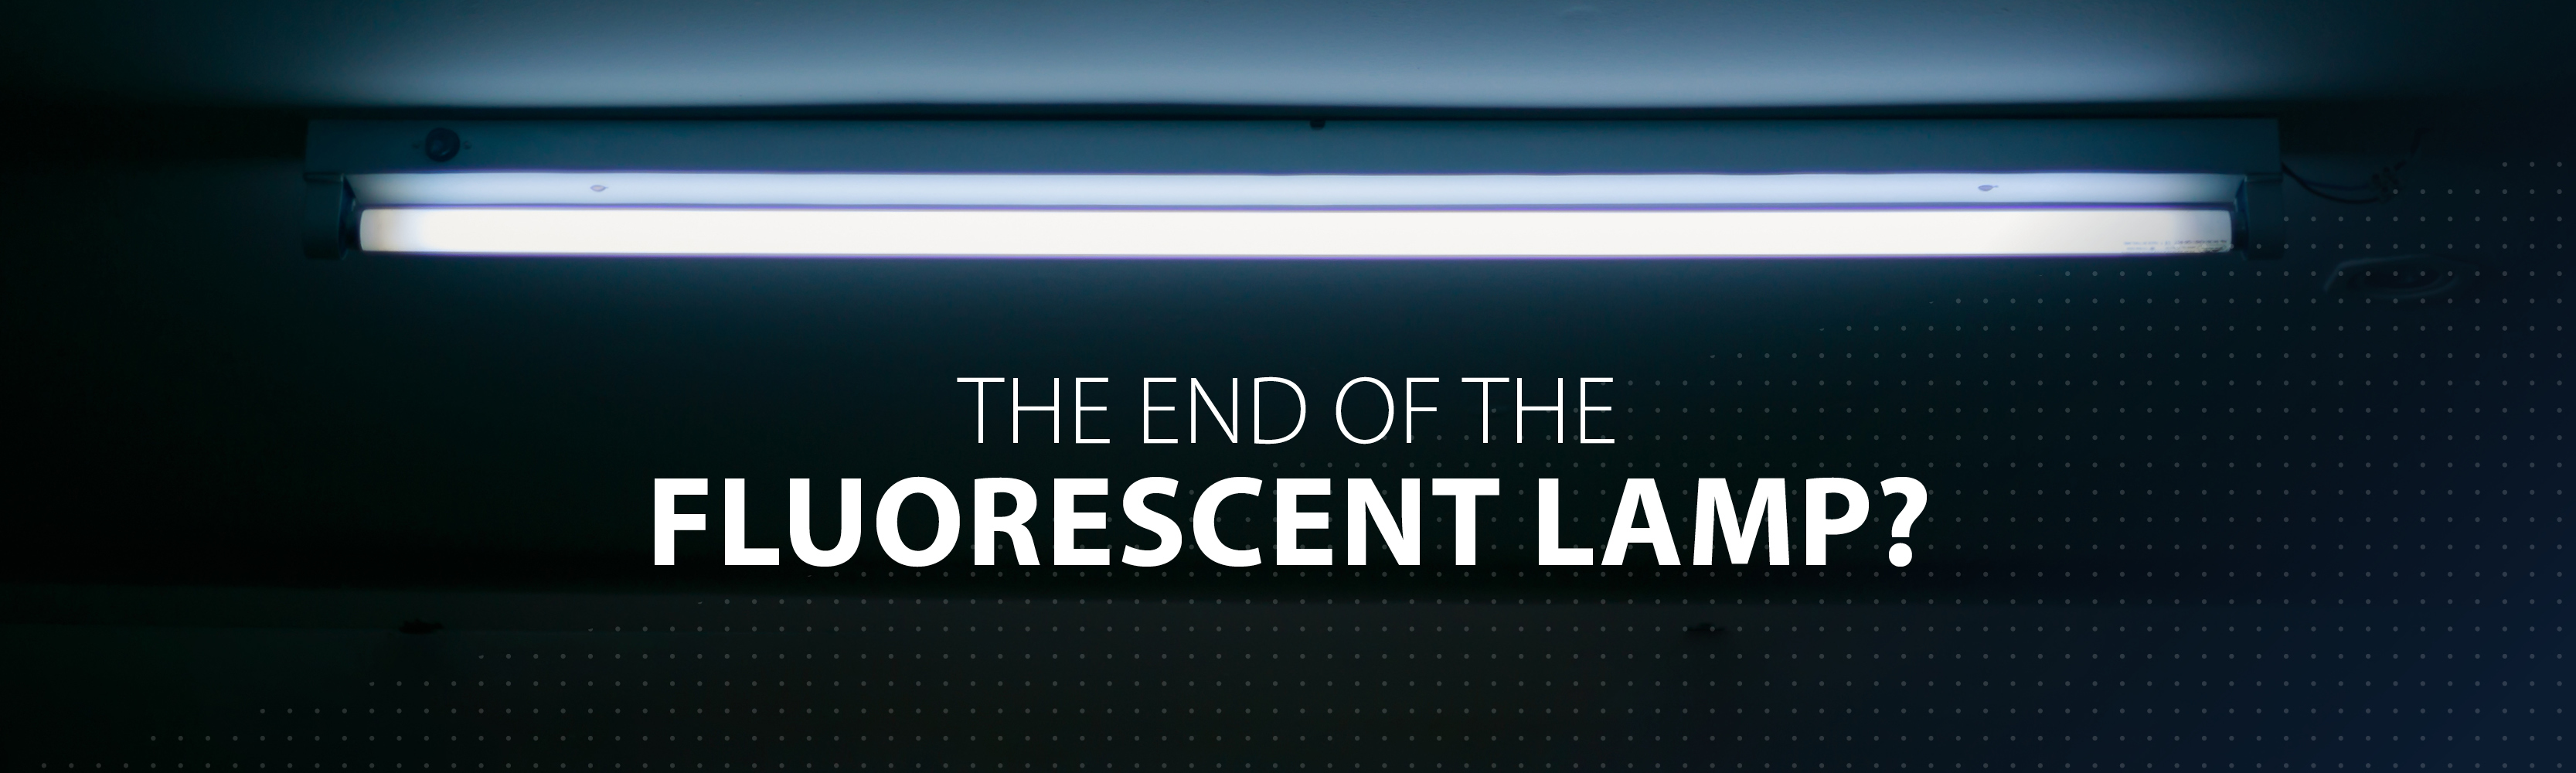 The end of the fluorescent lamp?